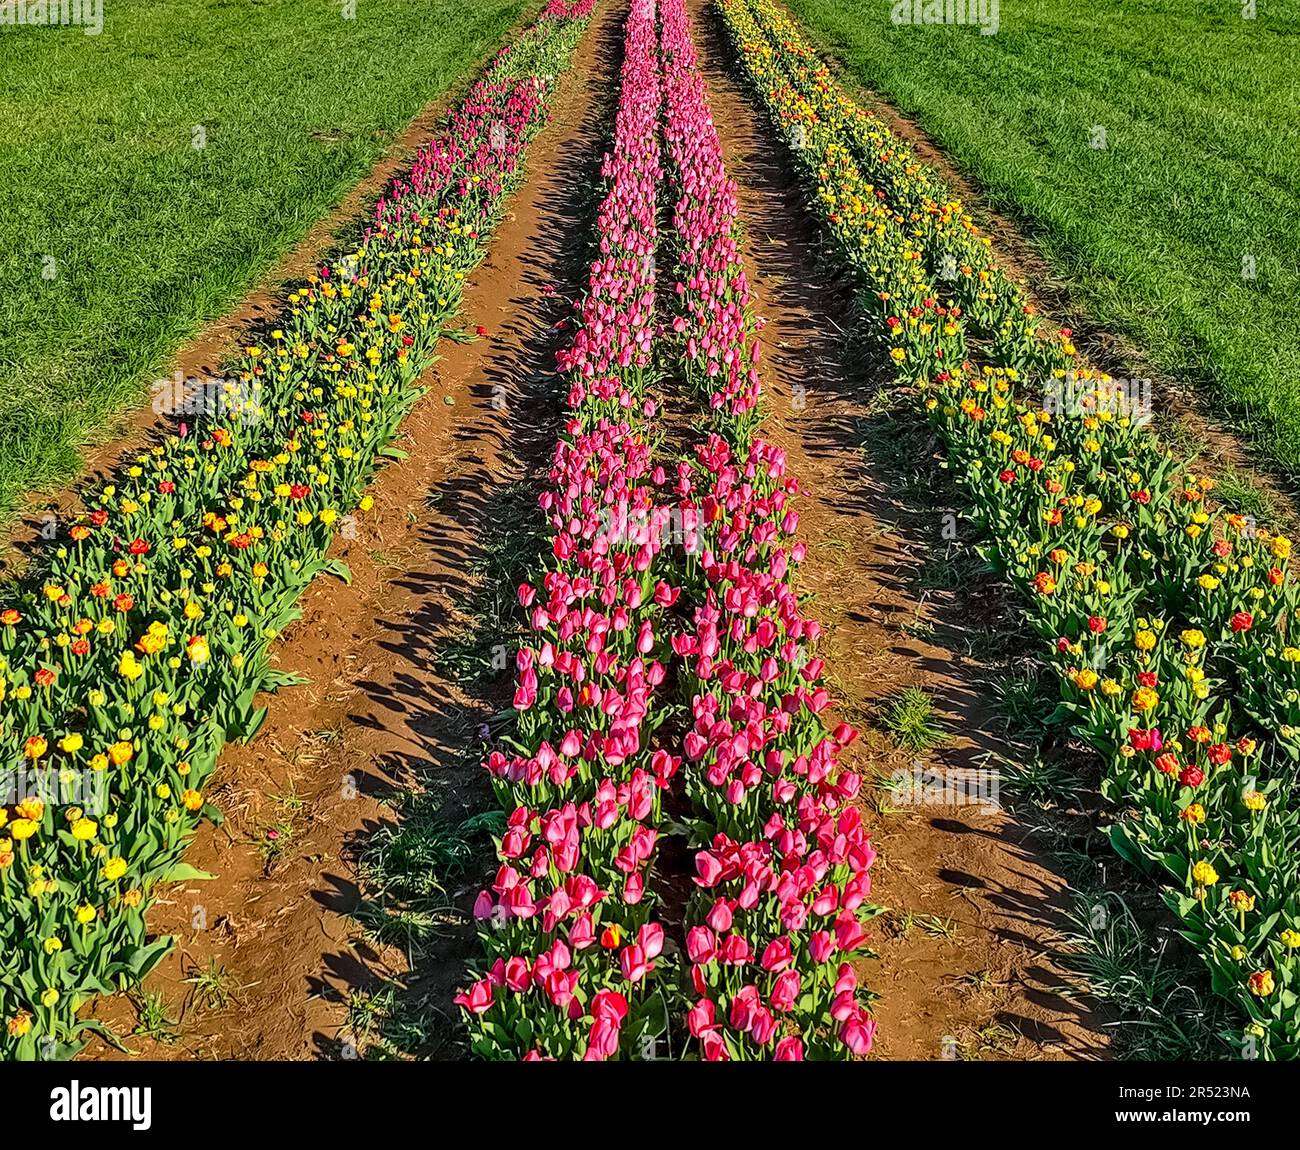 Aerial Tulip Farm - Aerial view of rows of colorful Tulips.  This image is available in color as well as black and white.   To view additional images Stock Photo